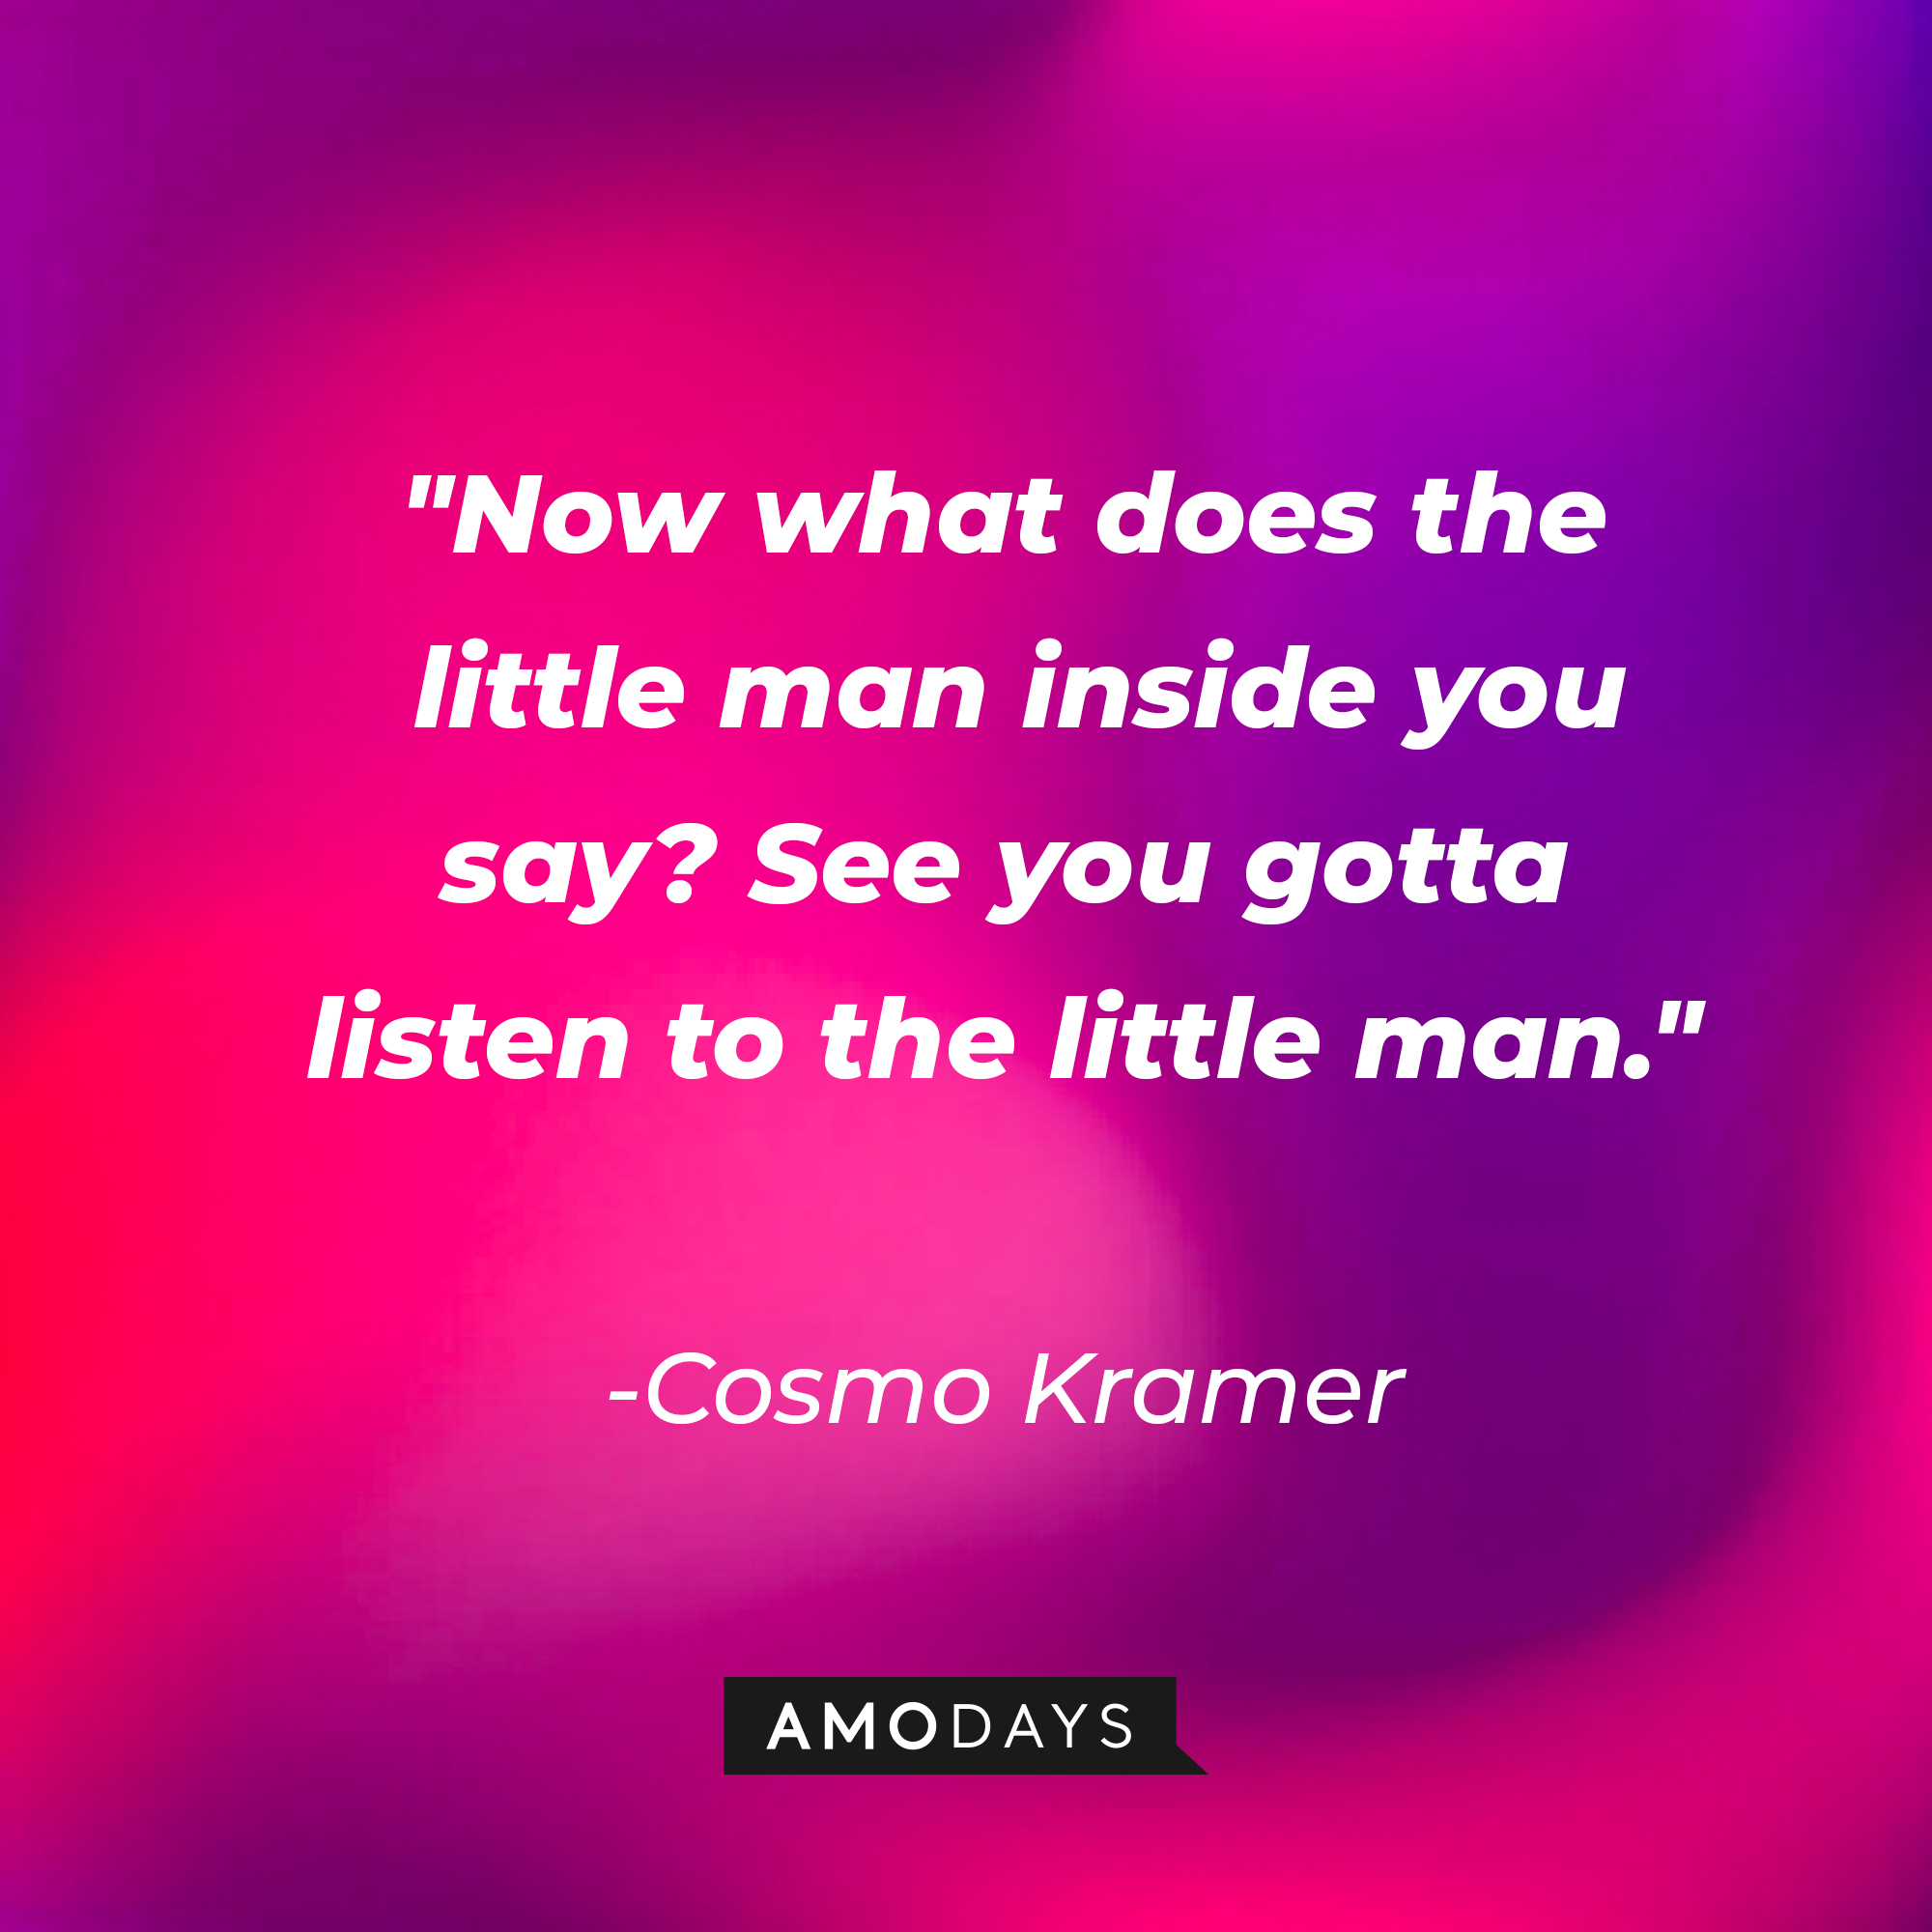 Cosmo Kramer’s quote: "Now what does the little man inside you say? See you gotta listen to the little man." | Source: AmoDays